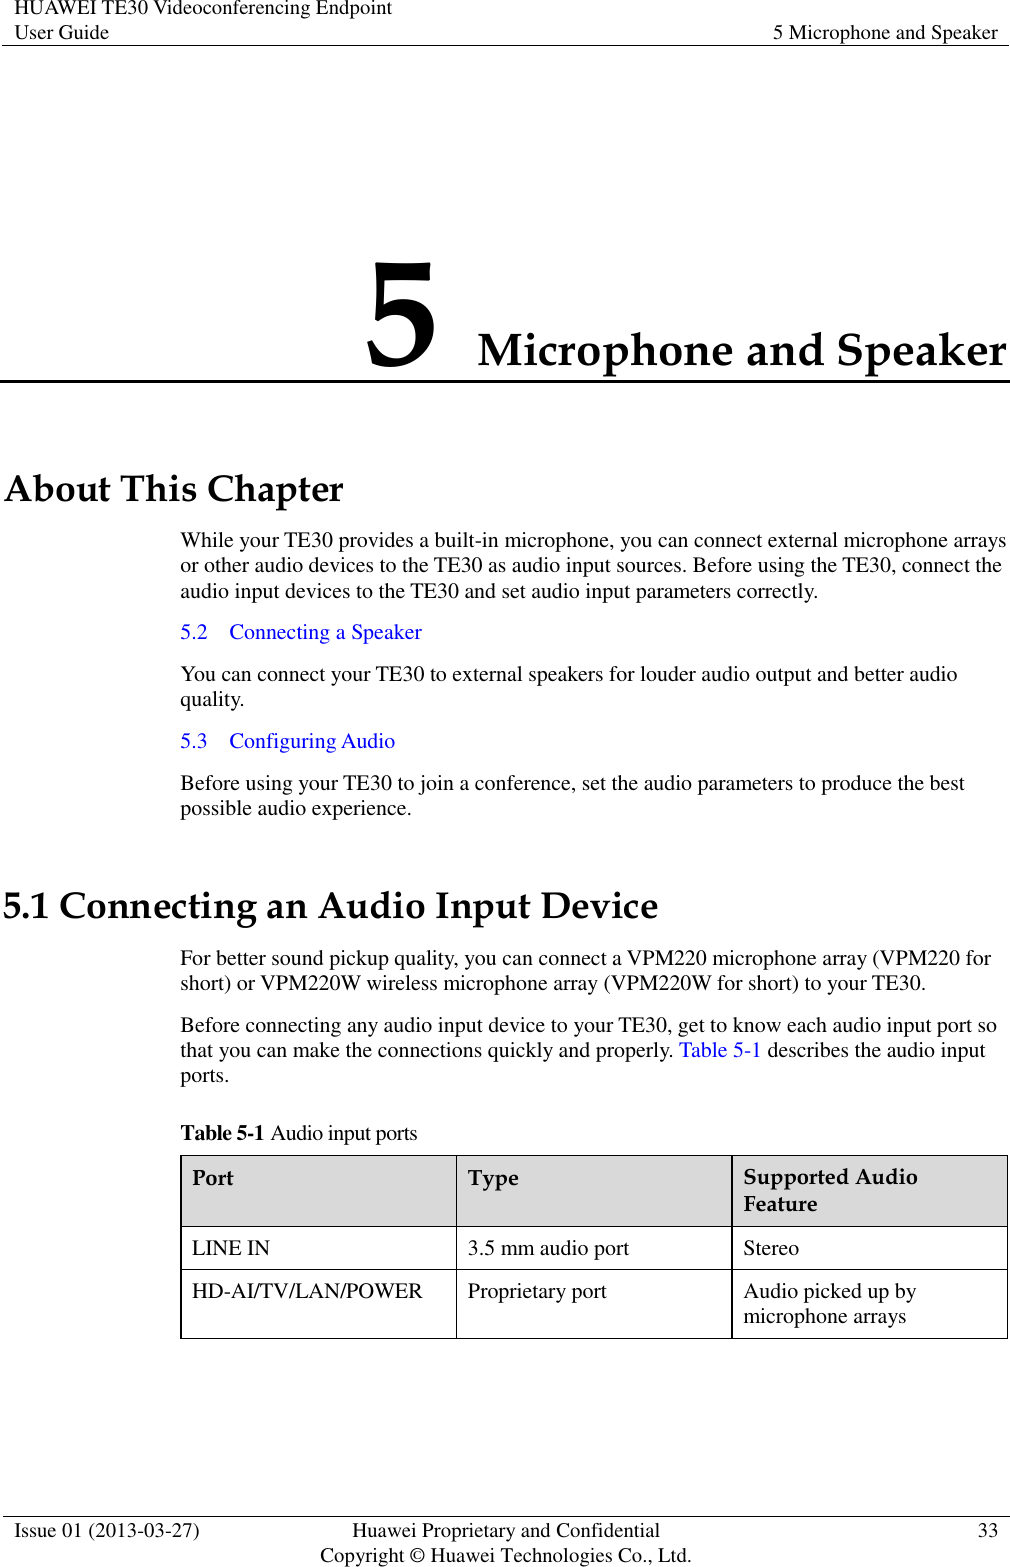 HUAWEI TE30 Videoconferencing Endpoint User Guide 5 Microphone and Speaker  Issue 01 (2013-03-27) Huawei Proprietary and Confidential                                     Copyright © Huawei Technologies Co., Ltd. 33  5 Microphone and Speaker About This Chapter While your TE30 provides a built-in microphone, you can connect external microphone arrays or other audio devices to the TE30 as audio input sources. Before using the TE30, connect the audio input devices to the TE30 and set audio input parameters correctly. 5.2    Connecting a Speaker You can connect your TE30 to external speakers for louder audio output and better audio quality. 5.3    Configuring Audio Before using your TE30 to join a conference, set the audio parameters to produce the best possible audio experience. 5.1 Connecting an Audio Input Device For better sound pickup quality, you can connect a VPM220 microphone array (VPM220 for short) or VPM220W wireless microphone array (VPM220W for short) to your TE30. Before connecting any audio input device to your TE30, get to know each audio input port so that you can make the connections quickly and properly. Table 5-1 describes the audio input ports. Table 5-1 Audio input ports Port Type Supported Audio Feature LINE IN 3.5 mm audio port Stereo HD-AI/TV/LAN/POWER Proprietary port Audio picked up by microphone arrays  